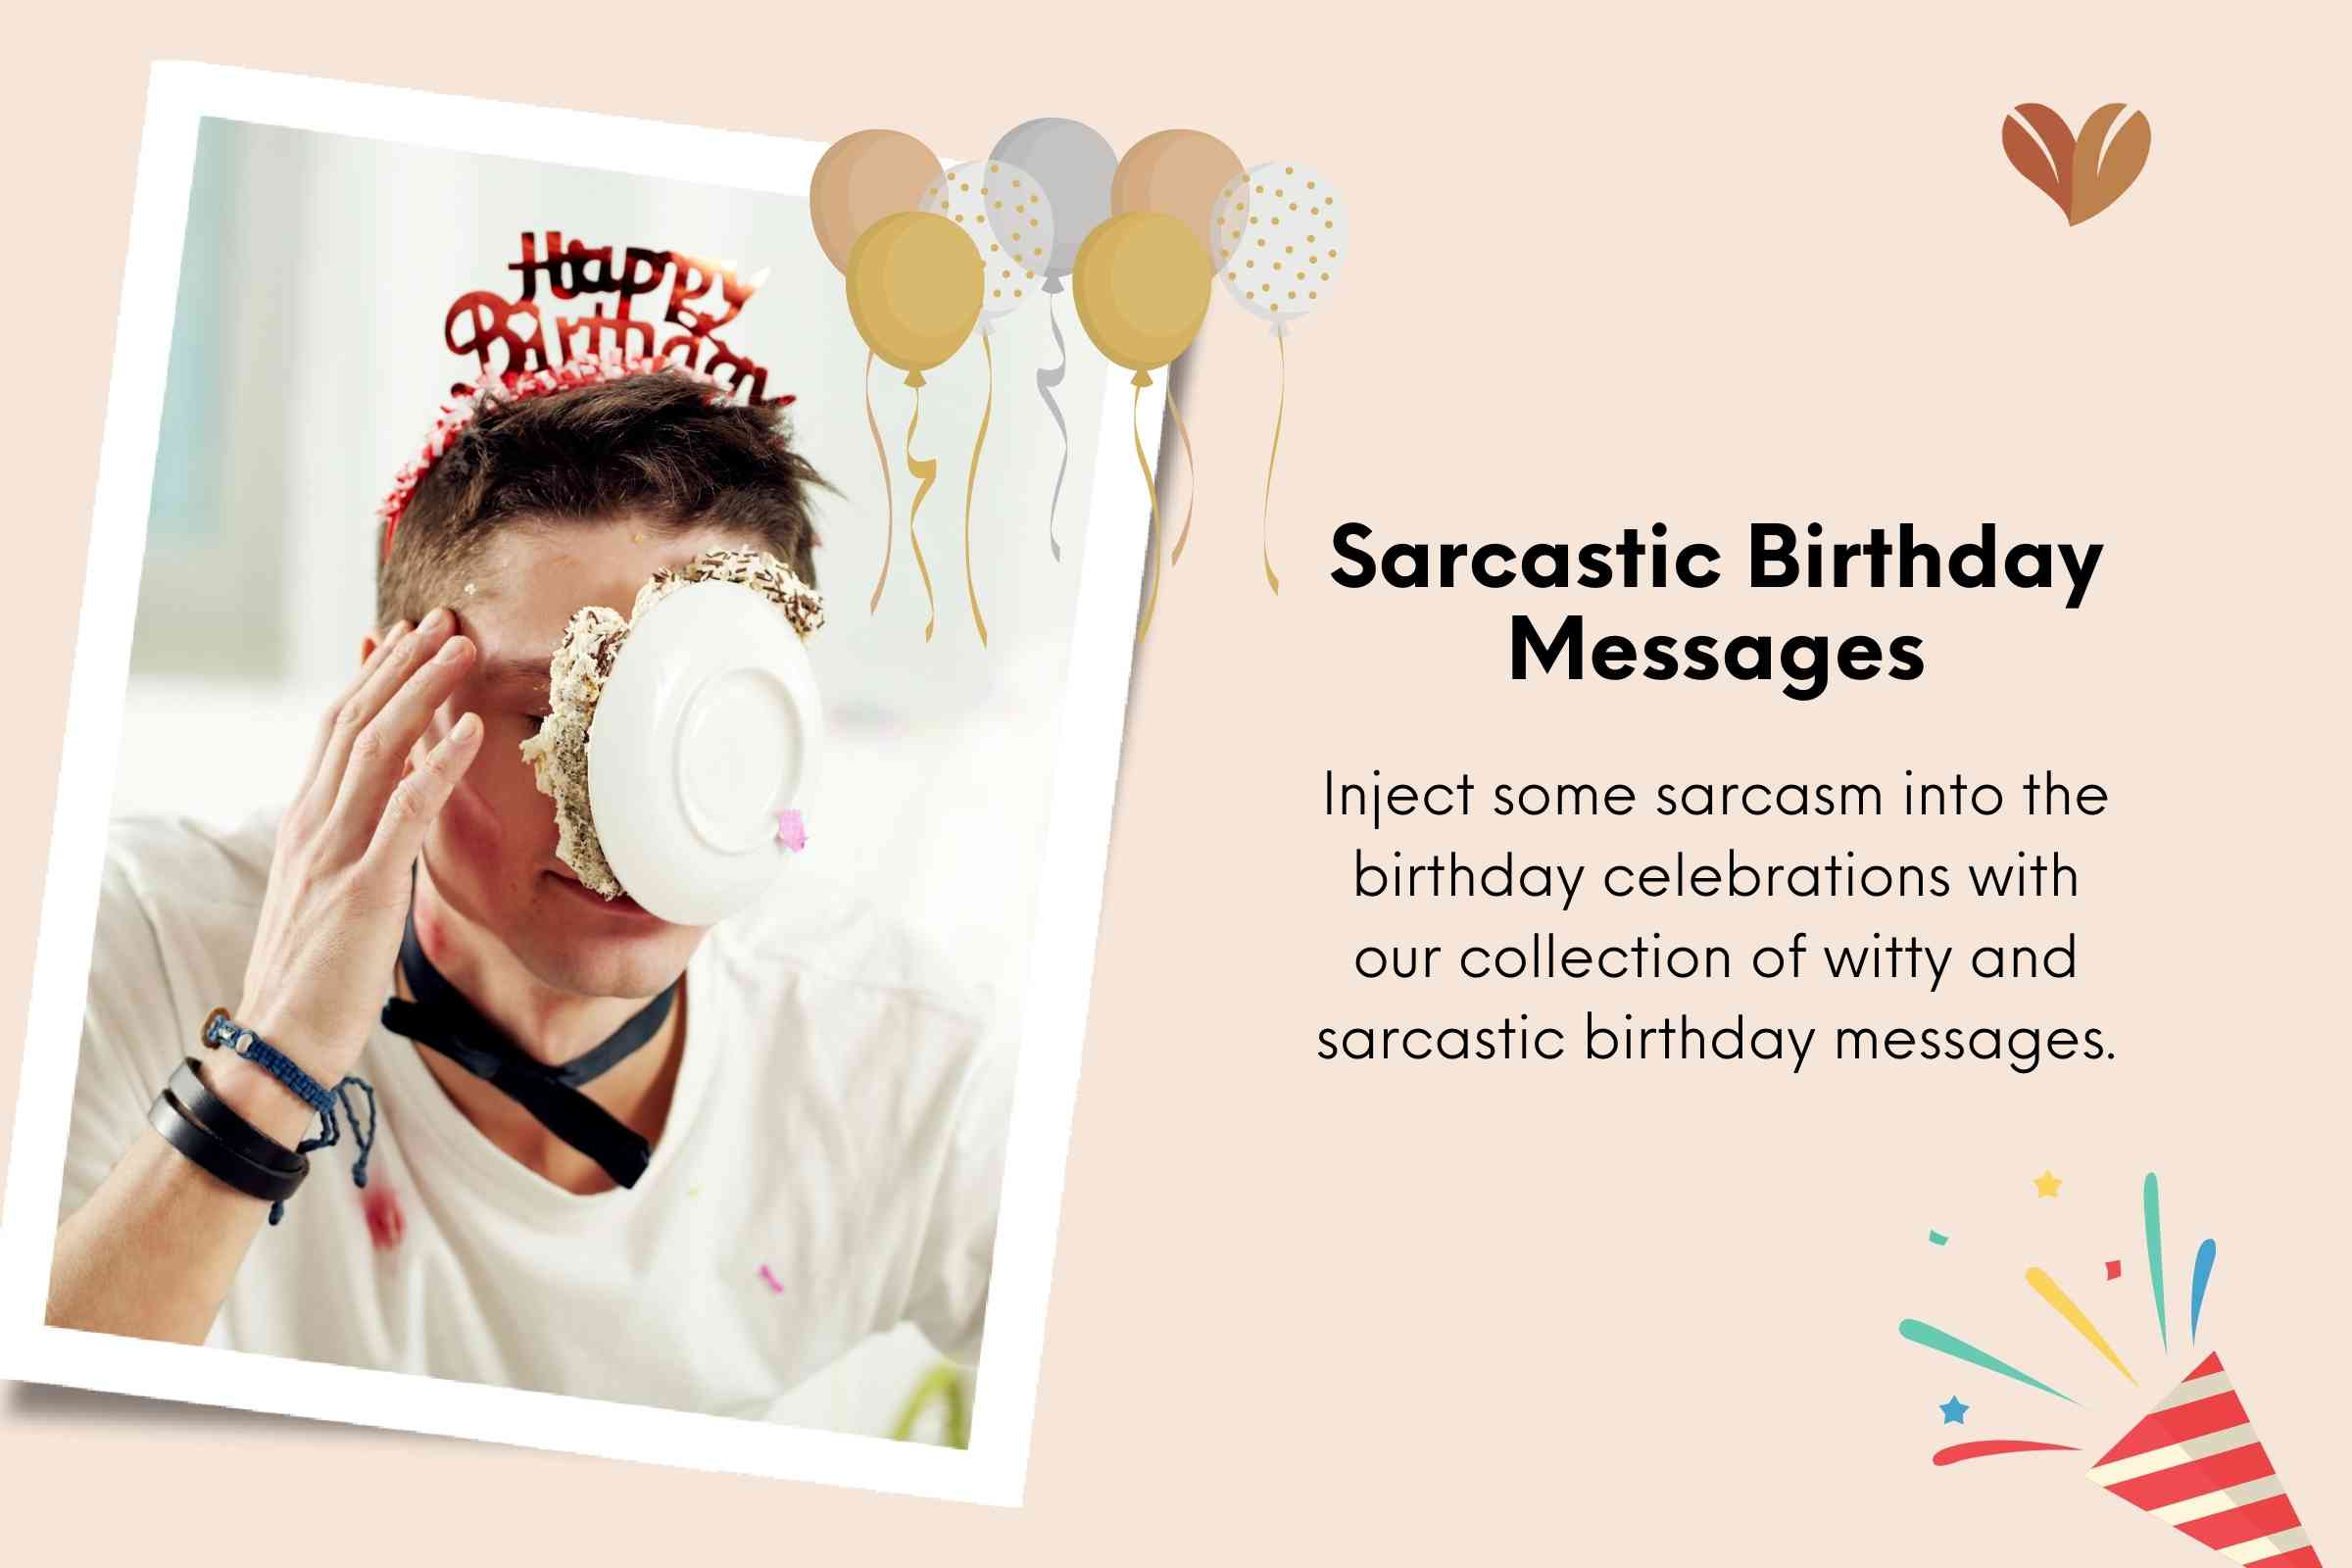 Happy Birthday Funny Quotes to Add Wit and Charm: Sarcastic Birthday Messages